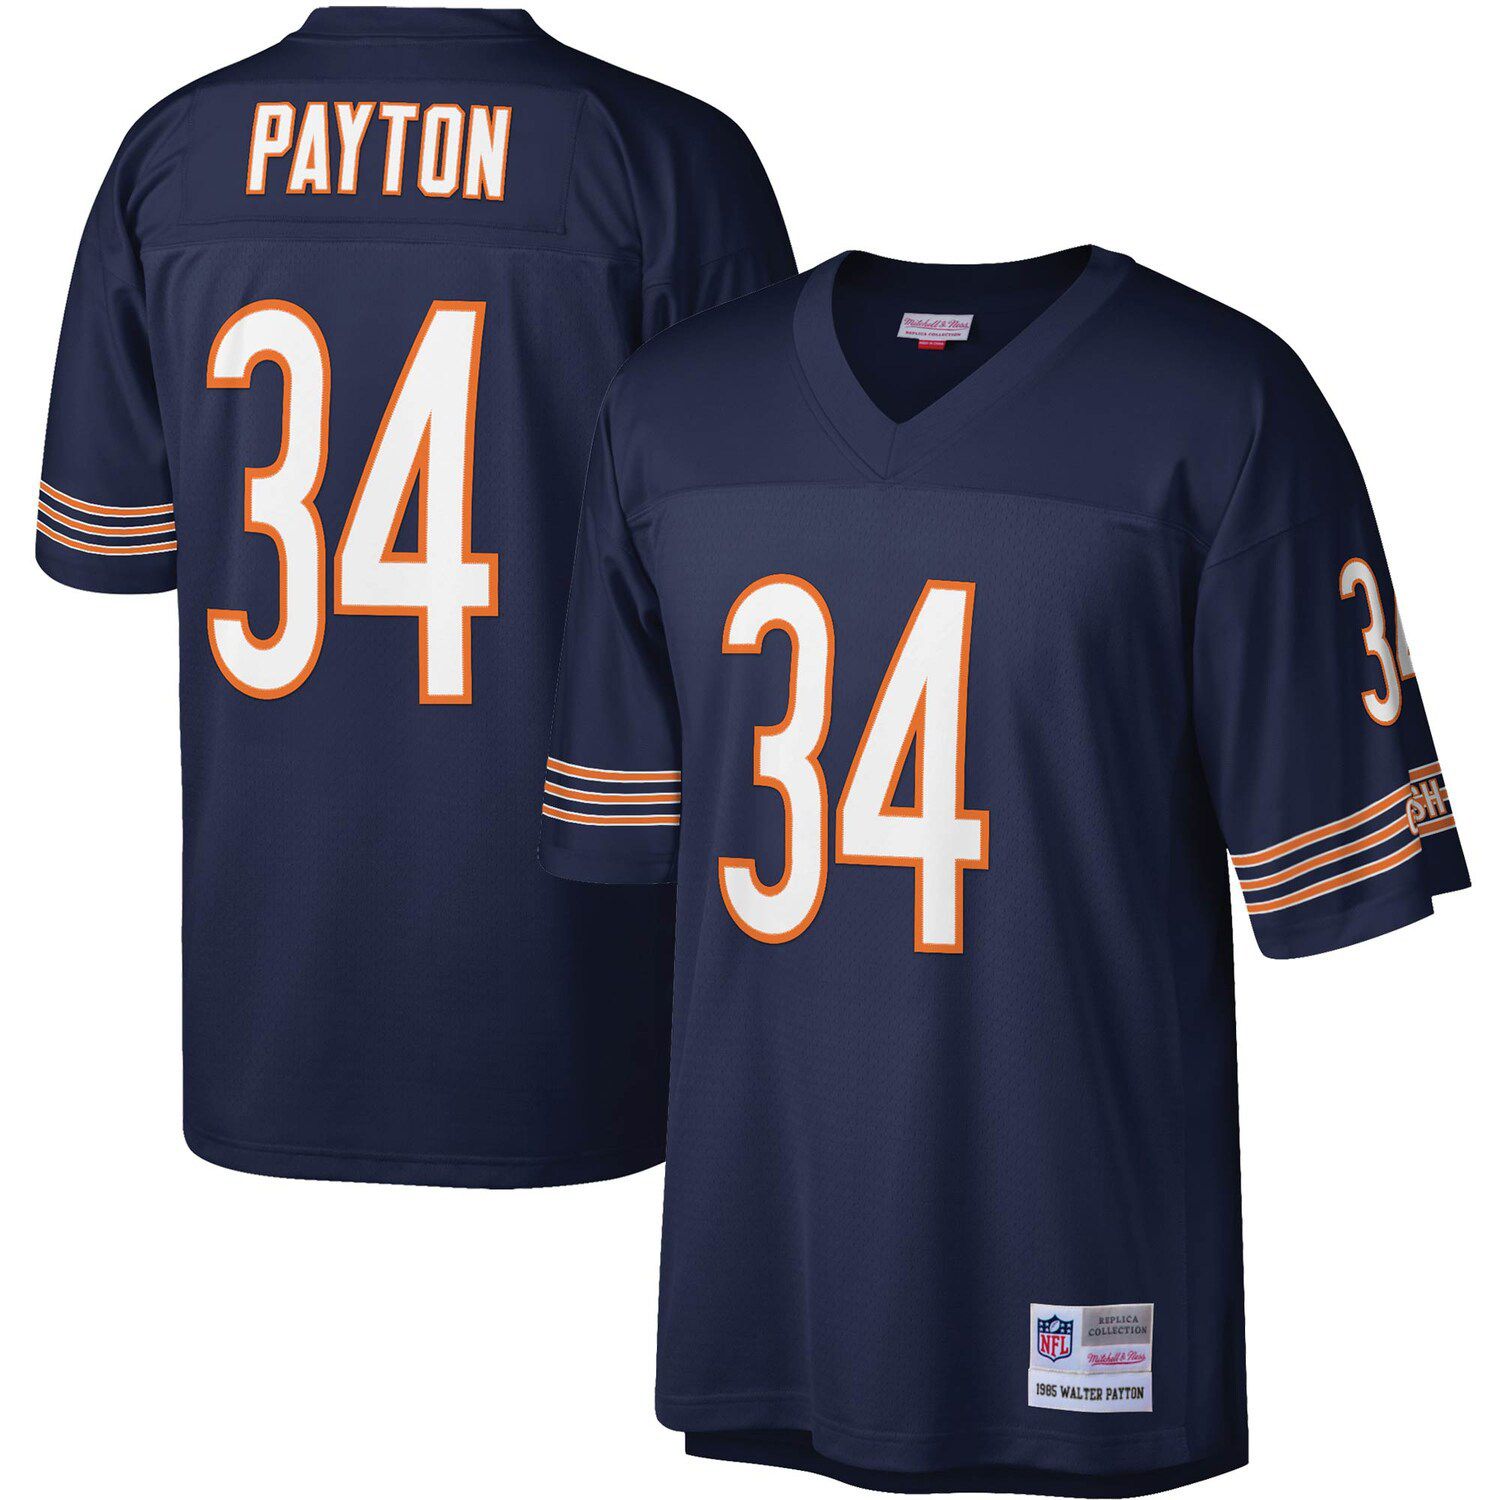 Toddler Mitchell & Ness Walter Payton Navy Chicago Bears 1985 Retired Legacy Jersey Size: 2T